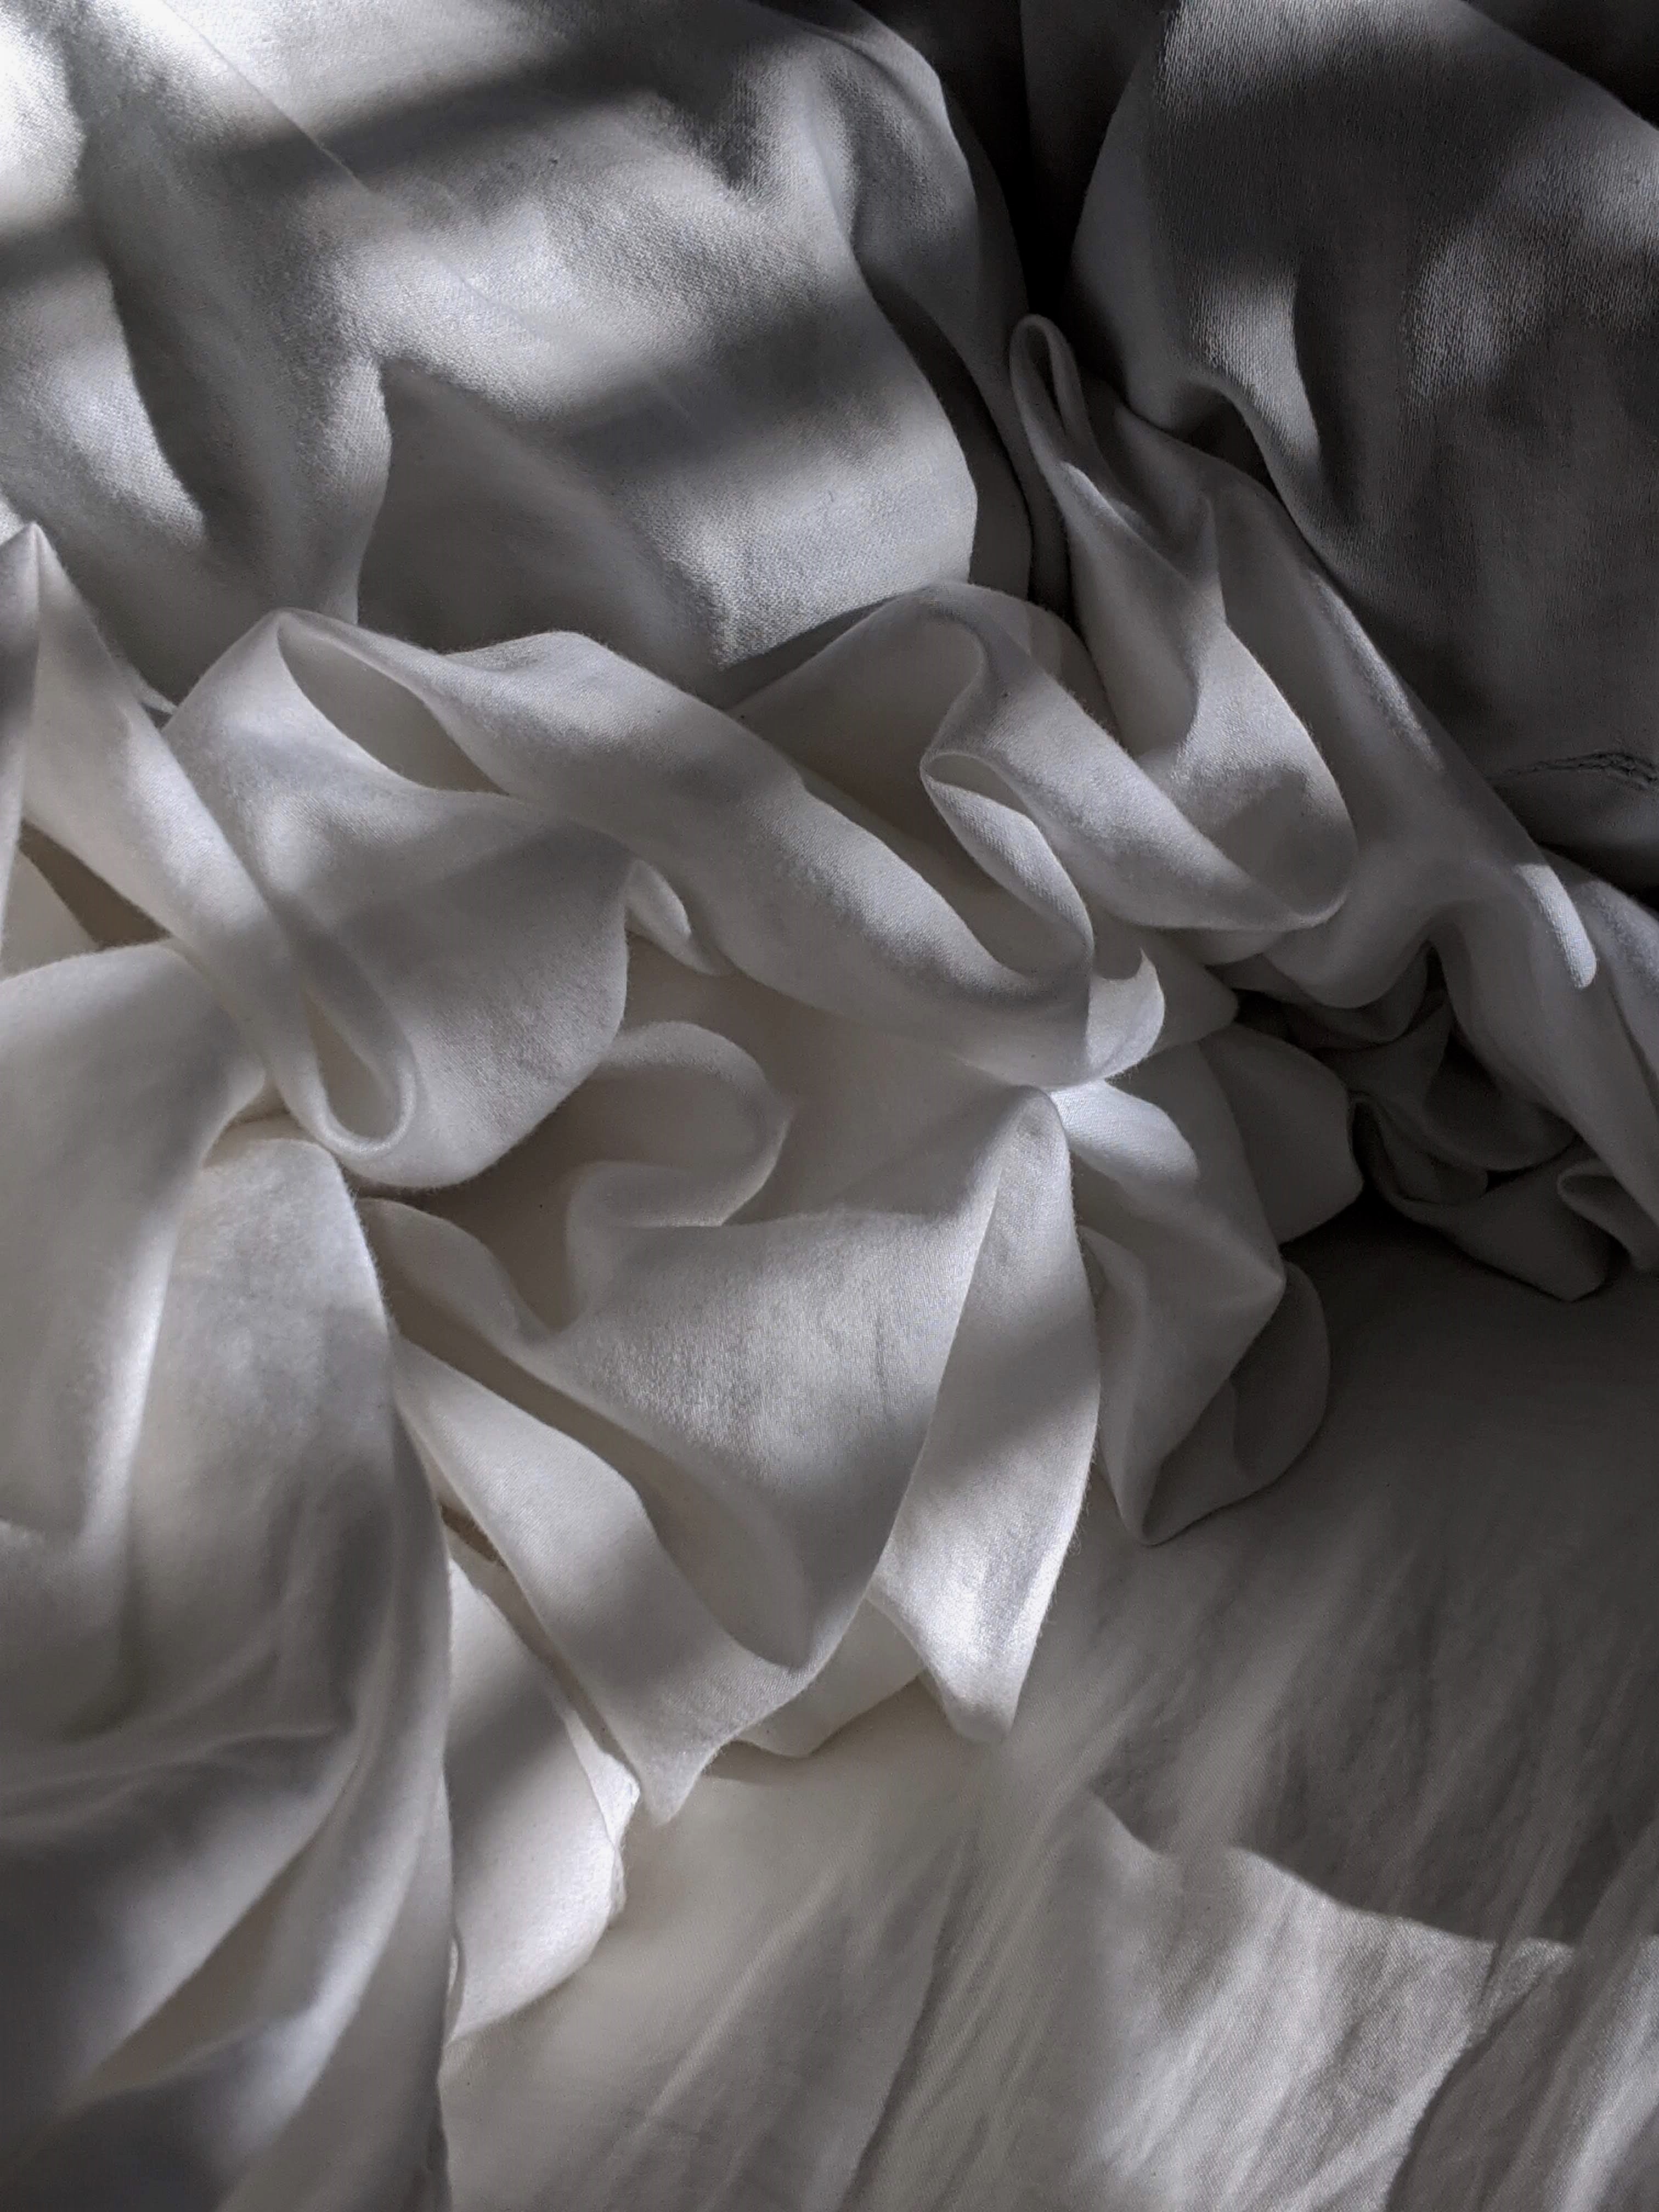 pleating, white, texture, textures, cloth, folds, bed